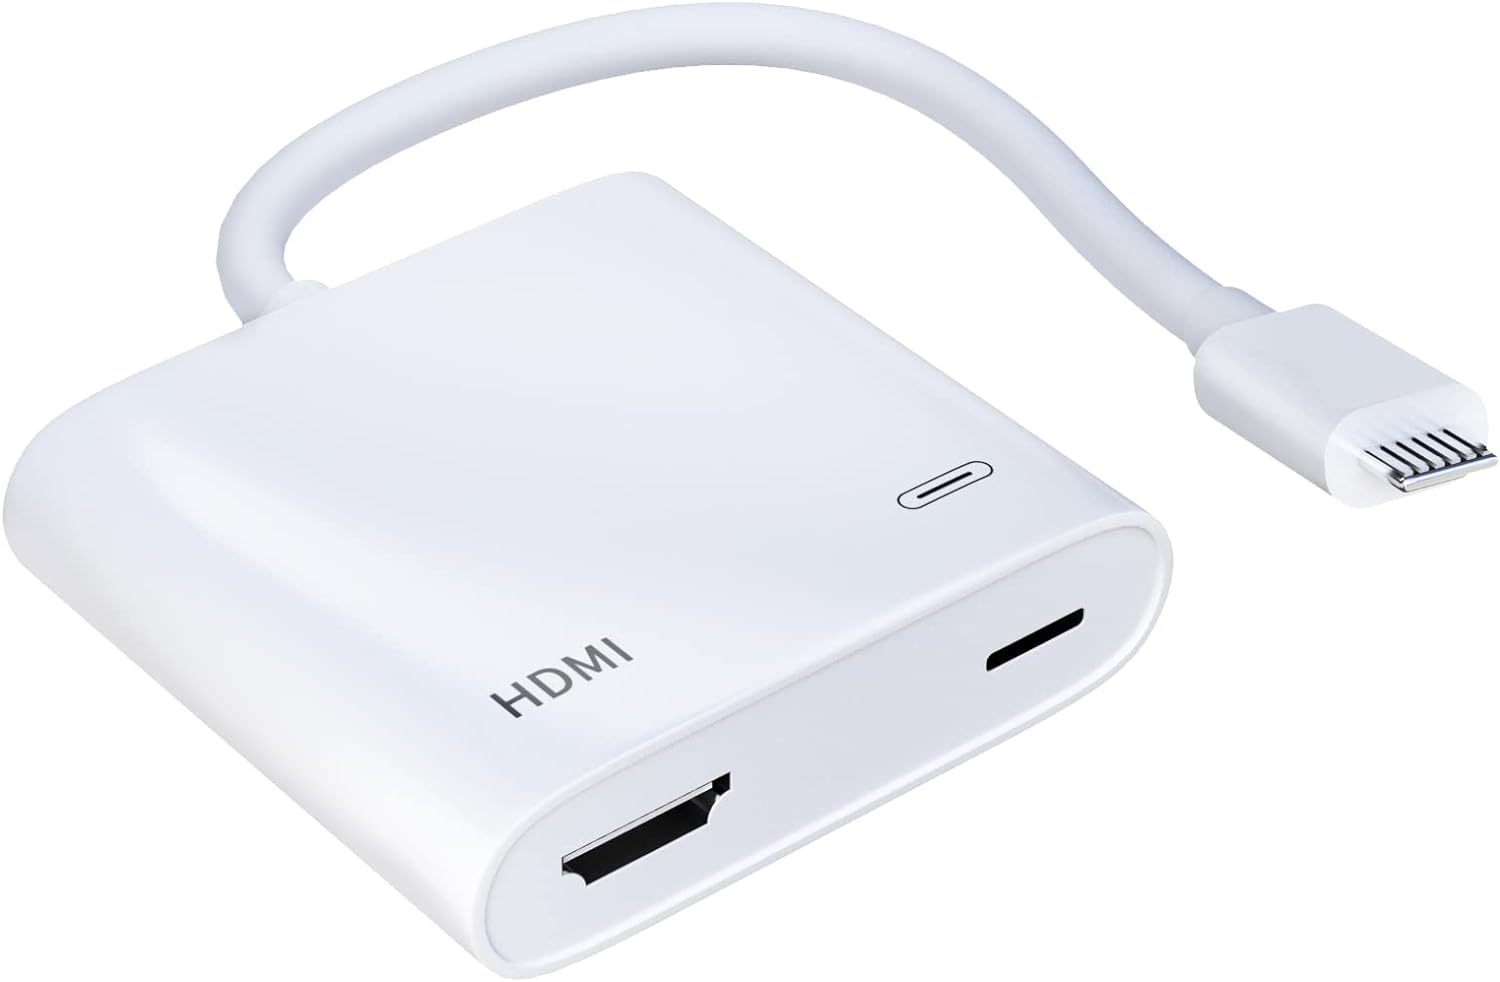 Lightning to HDMI Adapter - White